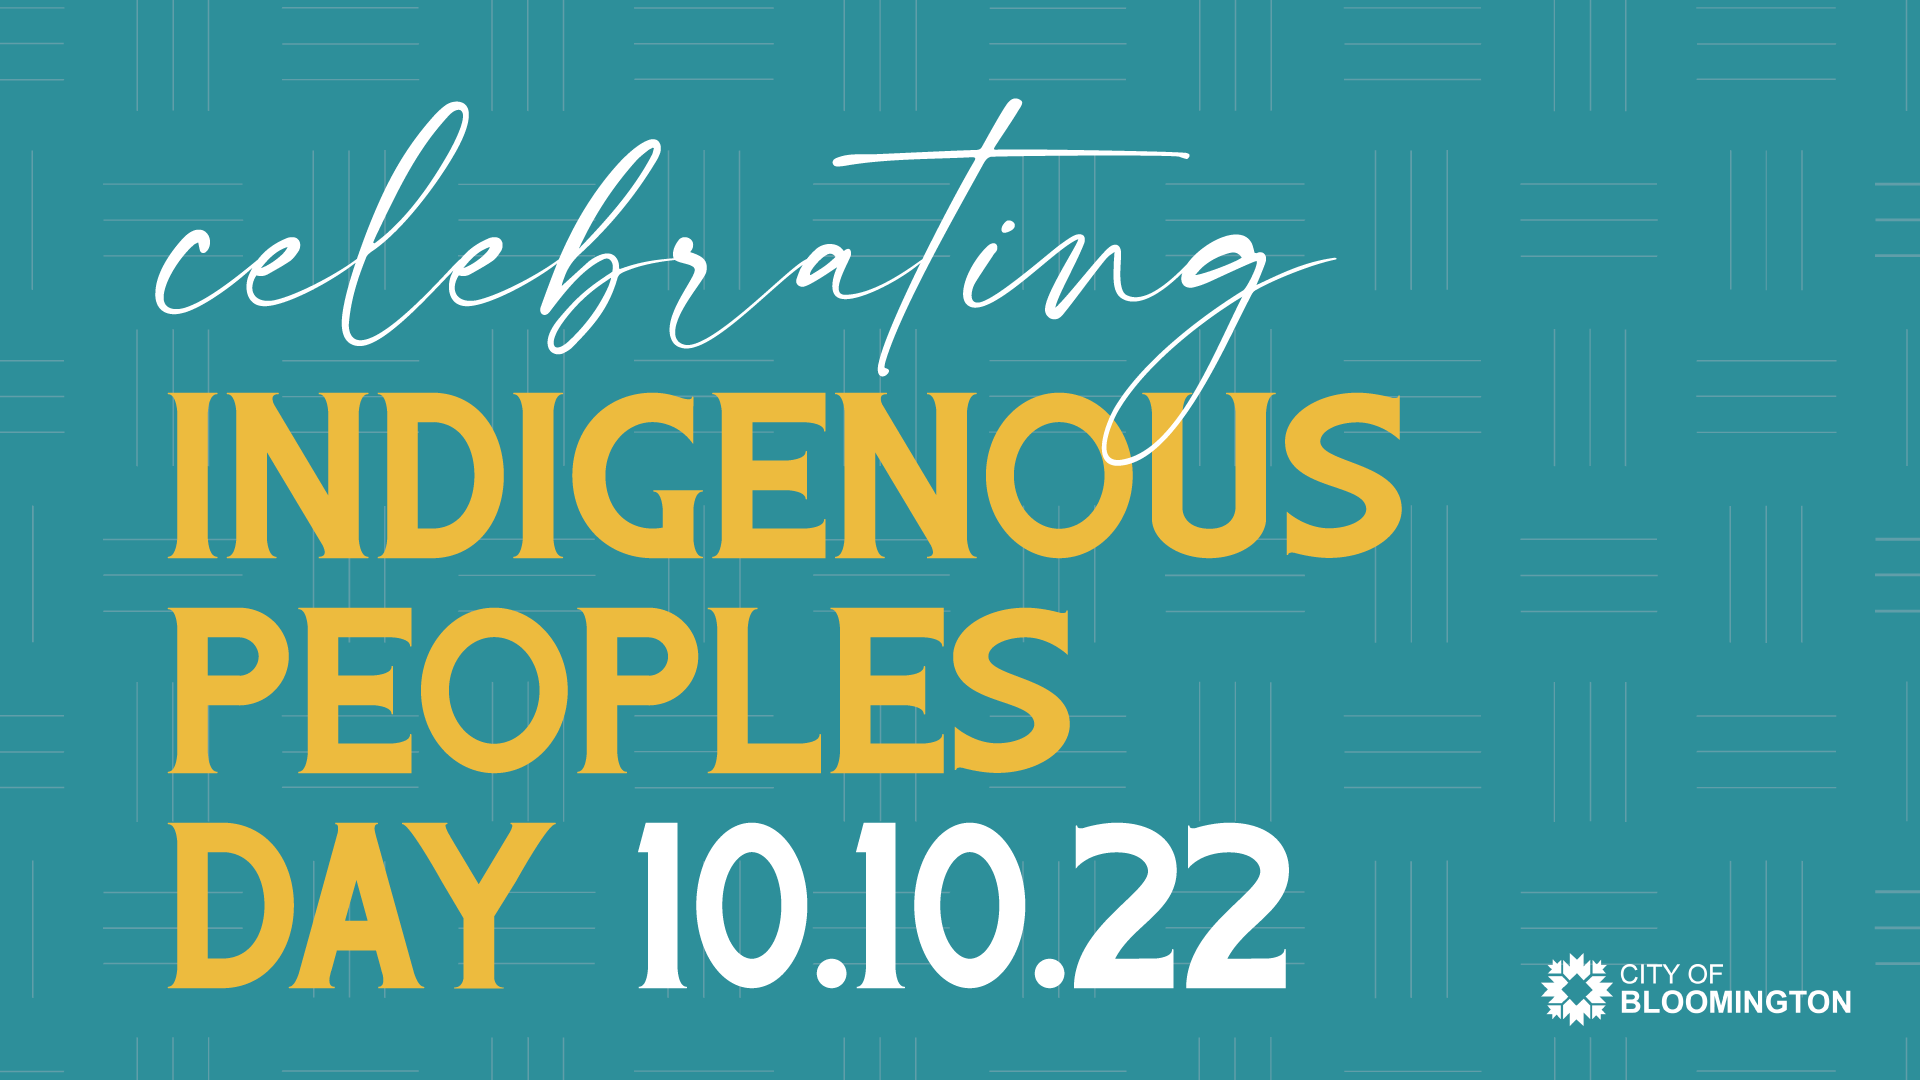 Celebrating Indigenous Peoples Day and 10.10.22 text on a teal background. The City of Bloomington logo in white placed in the lower right corner.